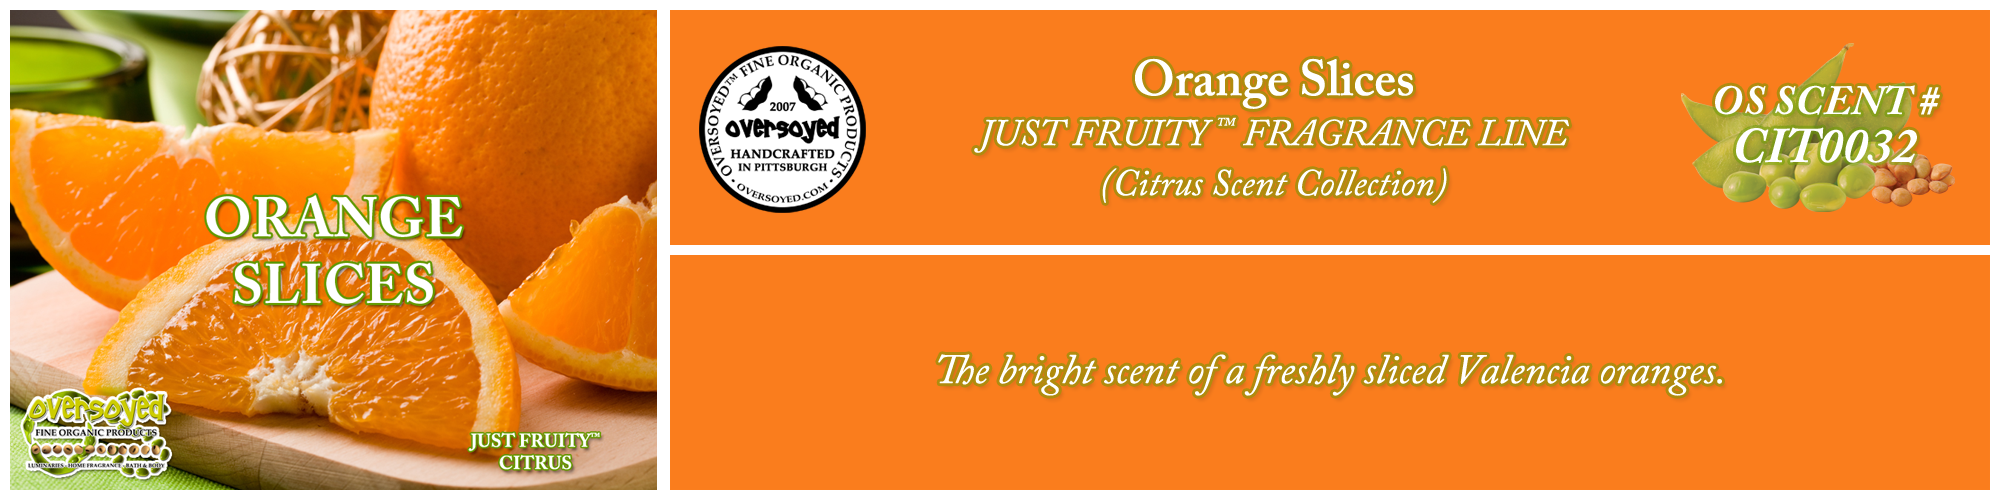 Orange Slices Handcrafted Products Collection